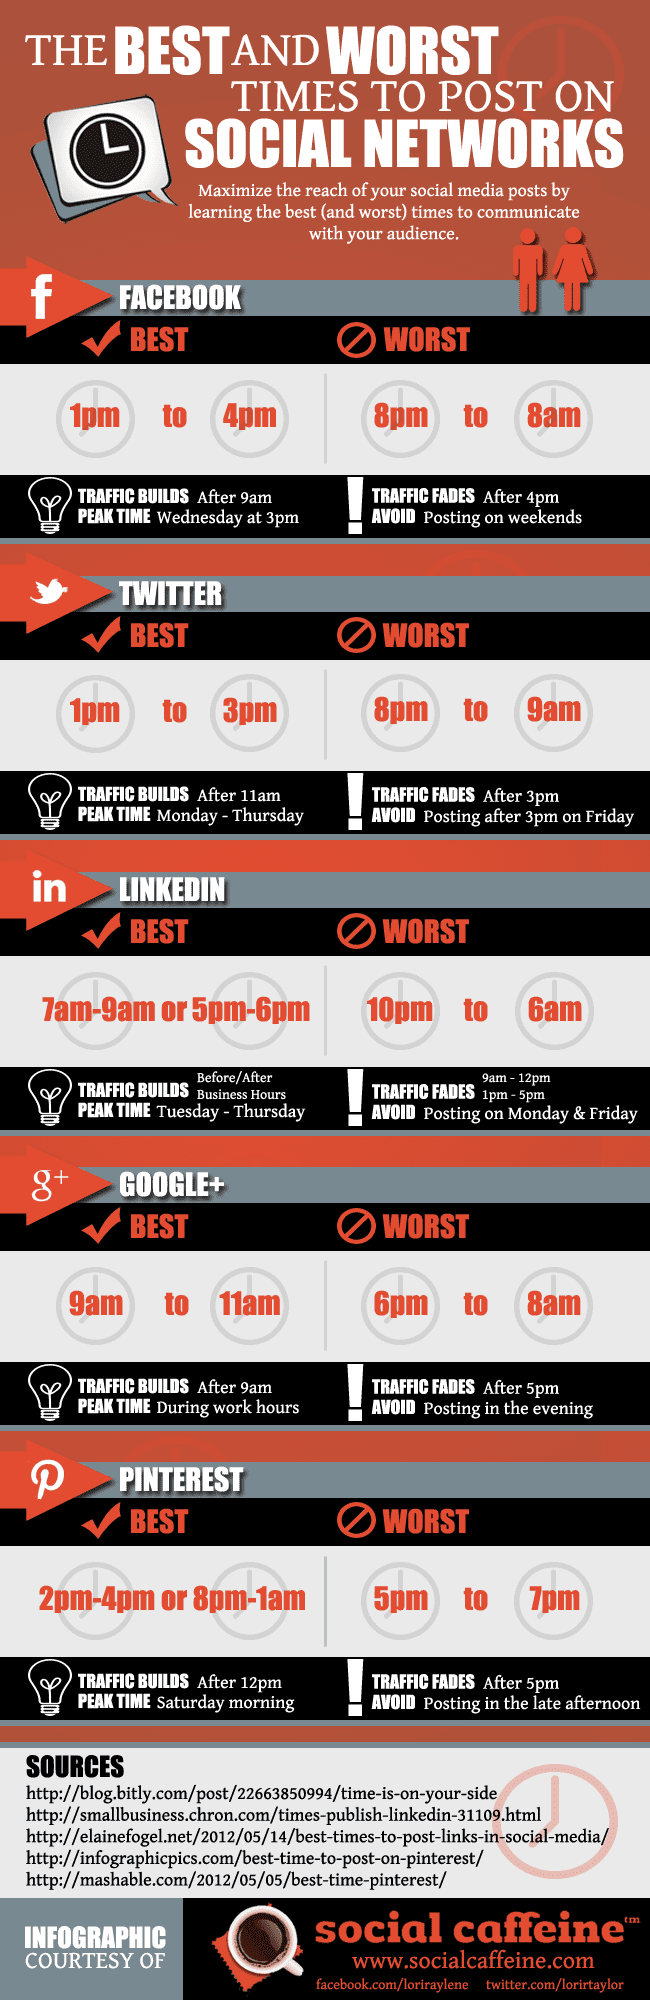 Best and worst times to post on social networks